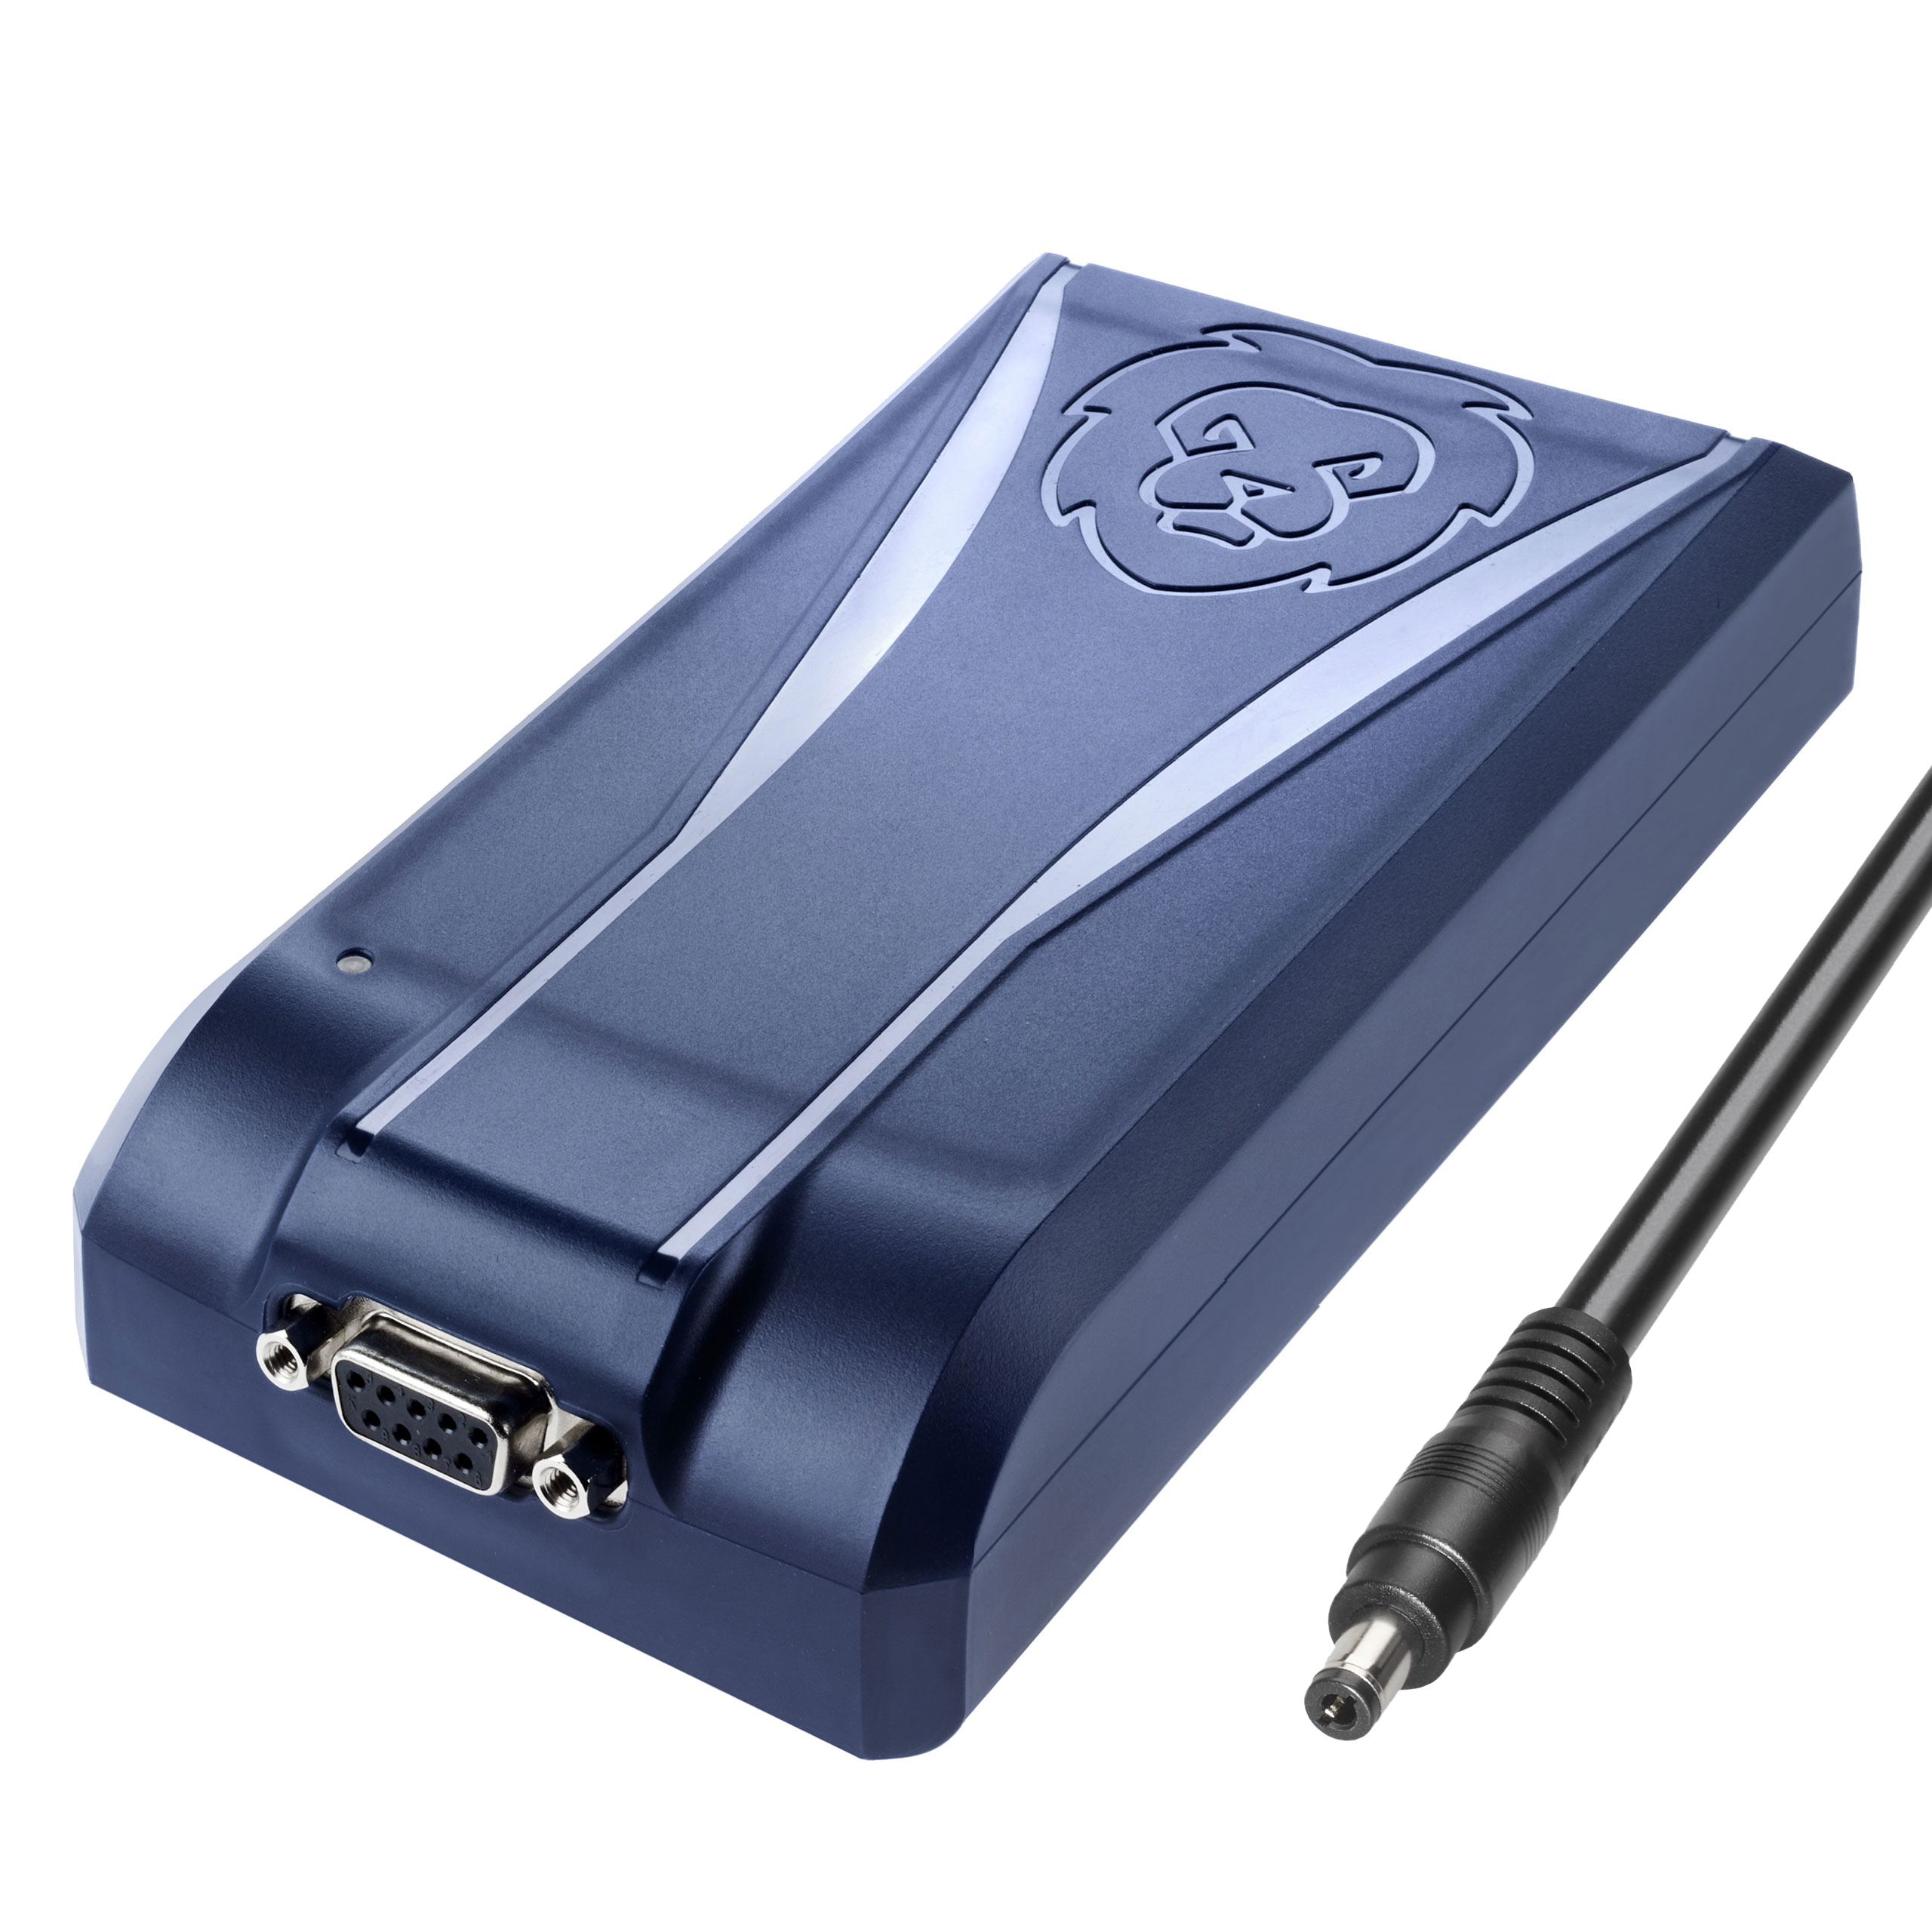 ONgineer LiON Smart Charger with DC barrel 5,5x2,1 EU (socket Europe)